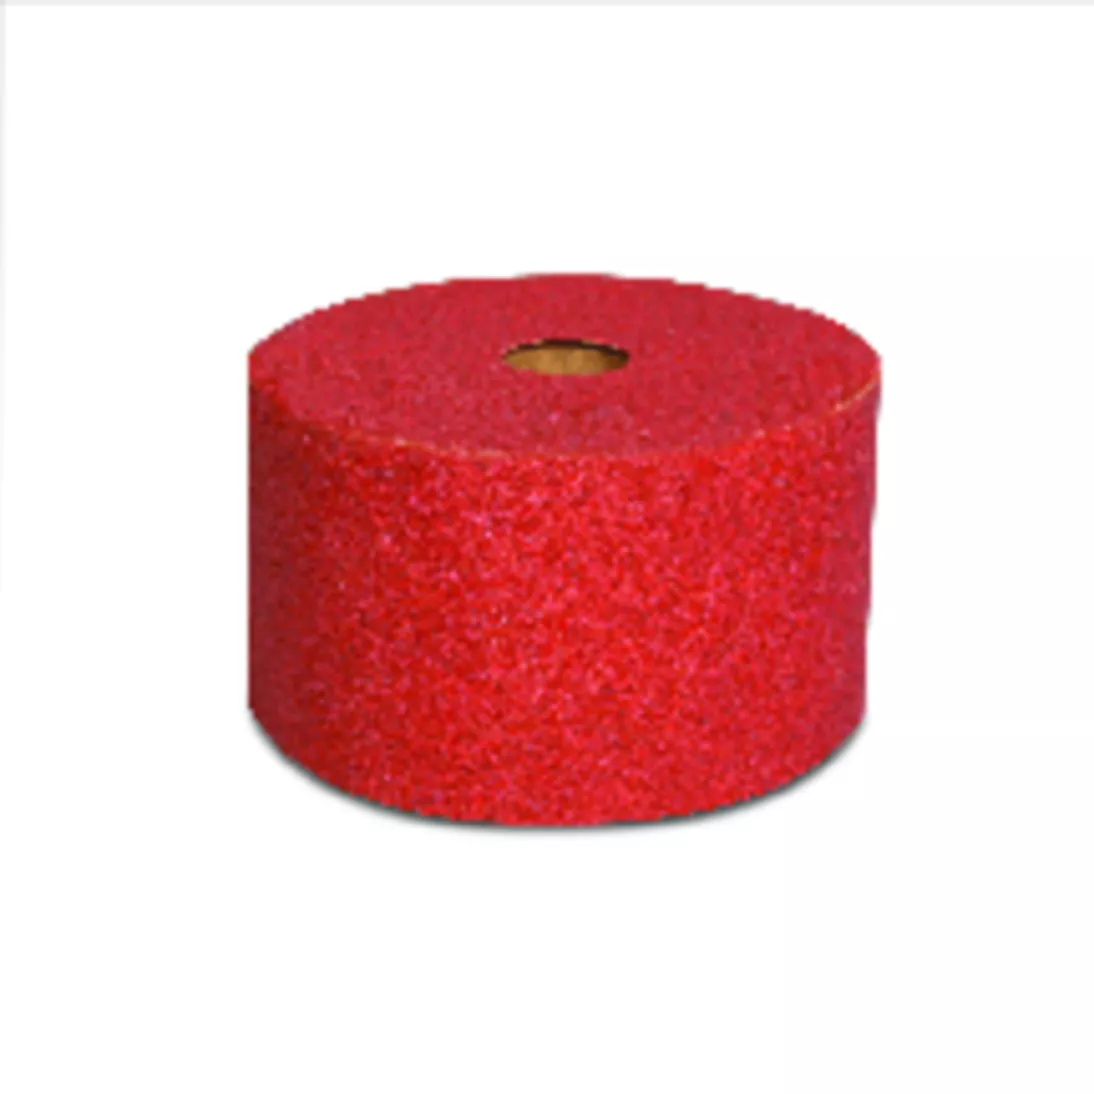 3M™ Red Abrasive Stikit™ Sheet Roll, 01688, P80, 2-3/4 in x 25 yd, D
weight, 6 rolls per case